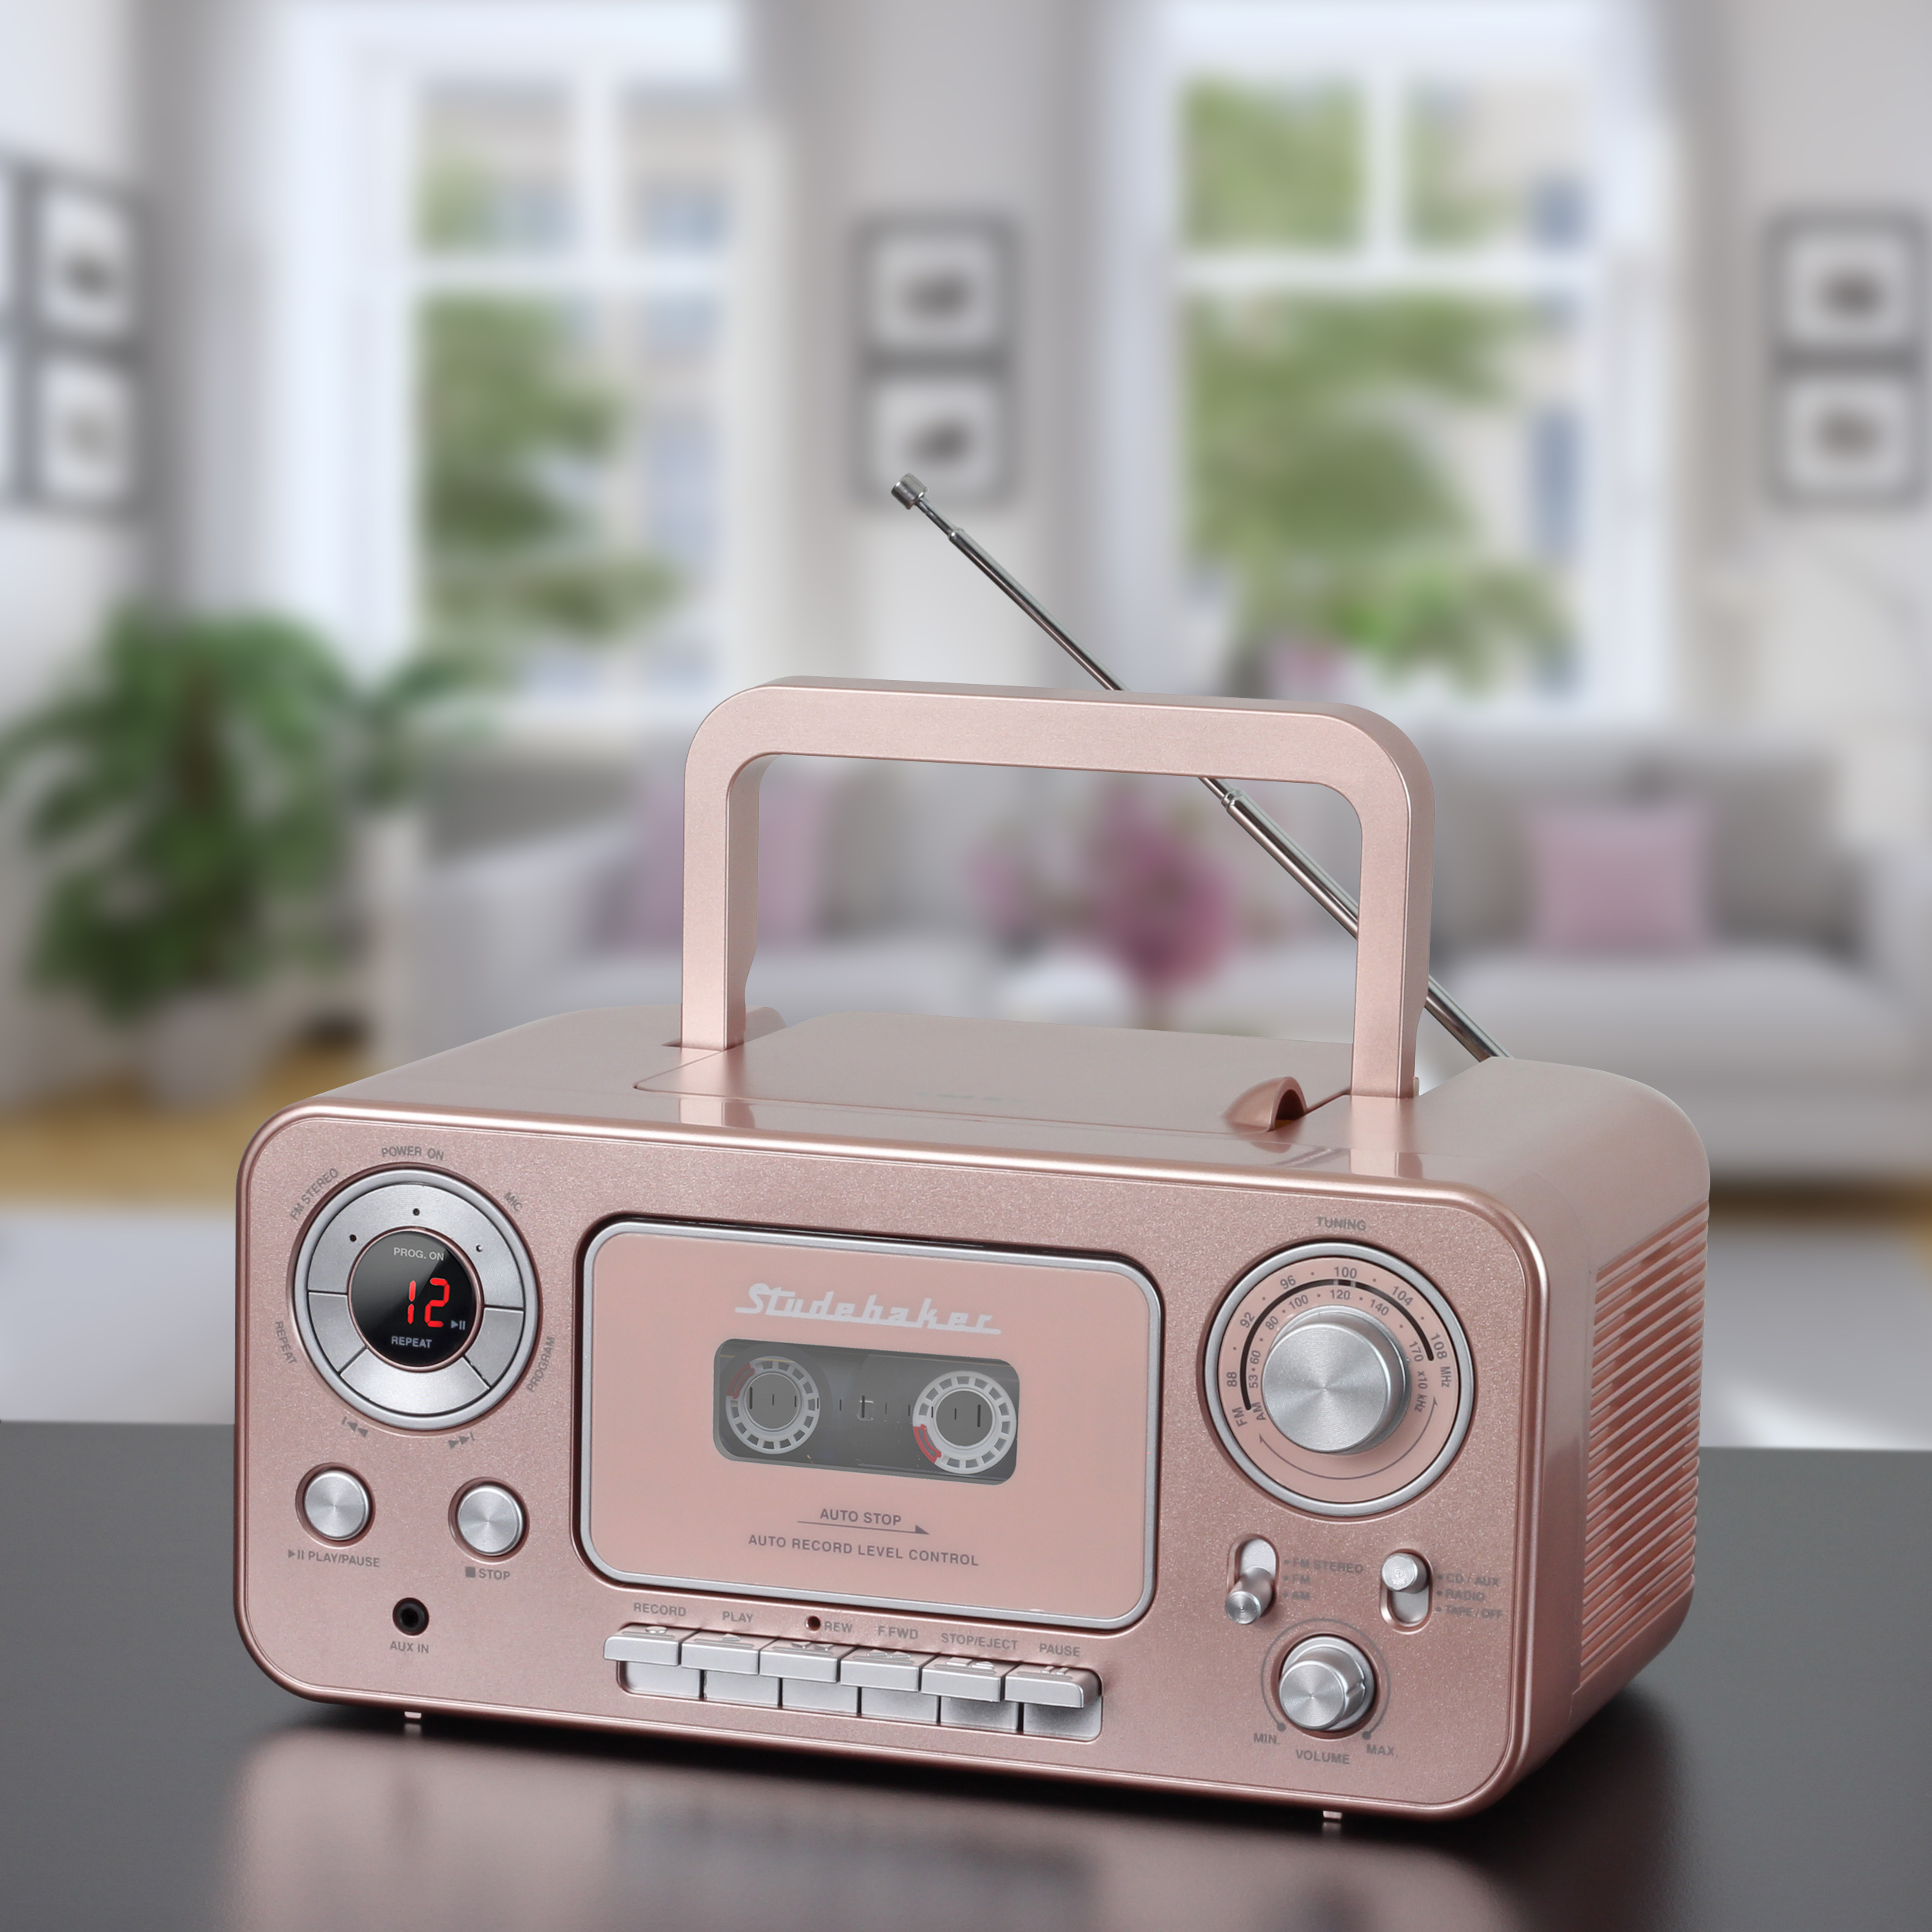 Portable Stereo CD Player with AM/FM Radio and Cassette Player/Recorder - image 4 of 4